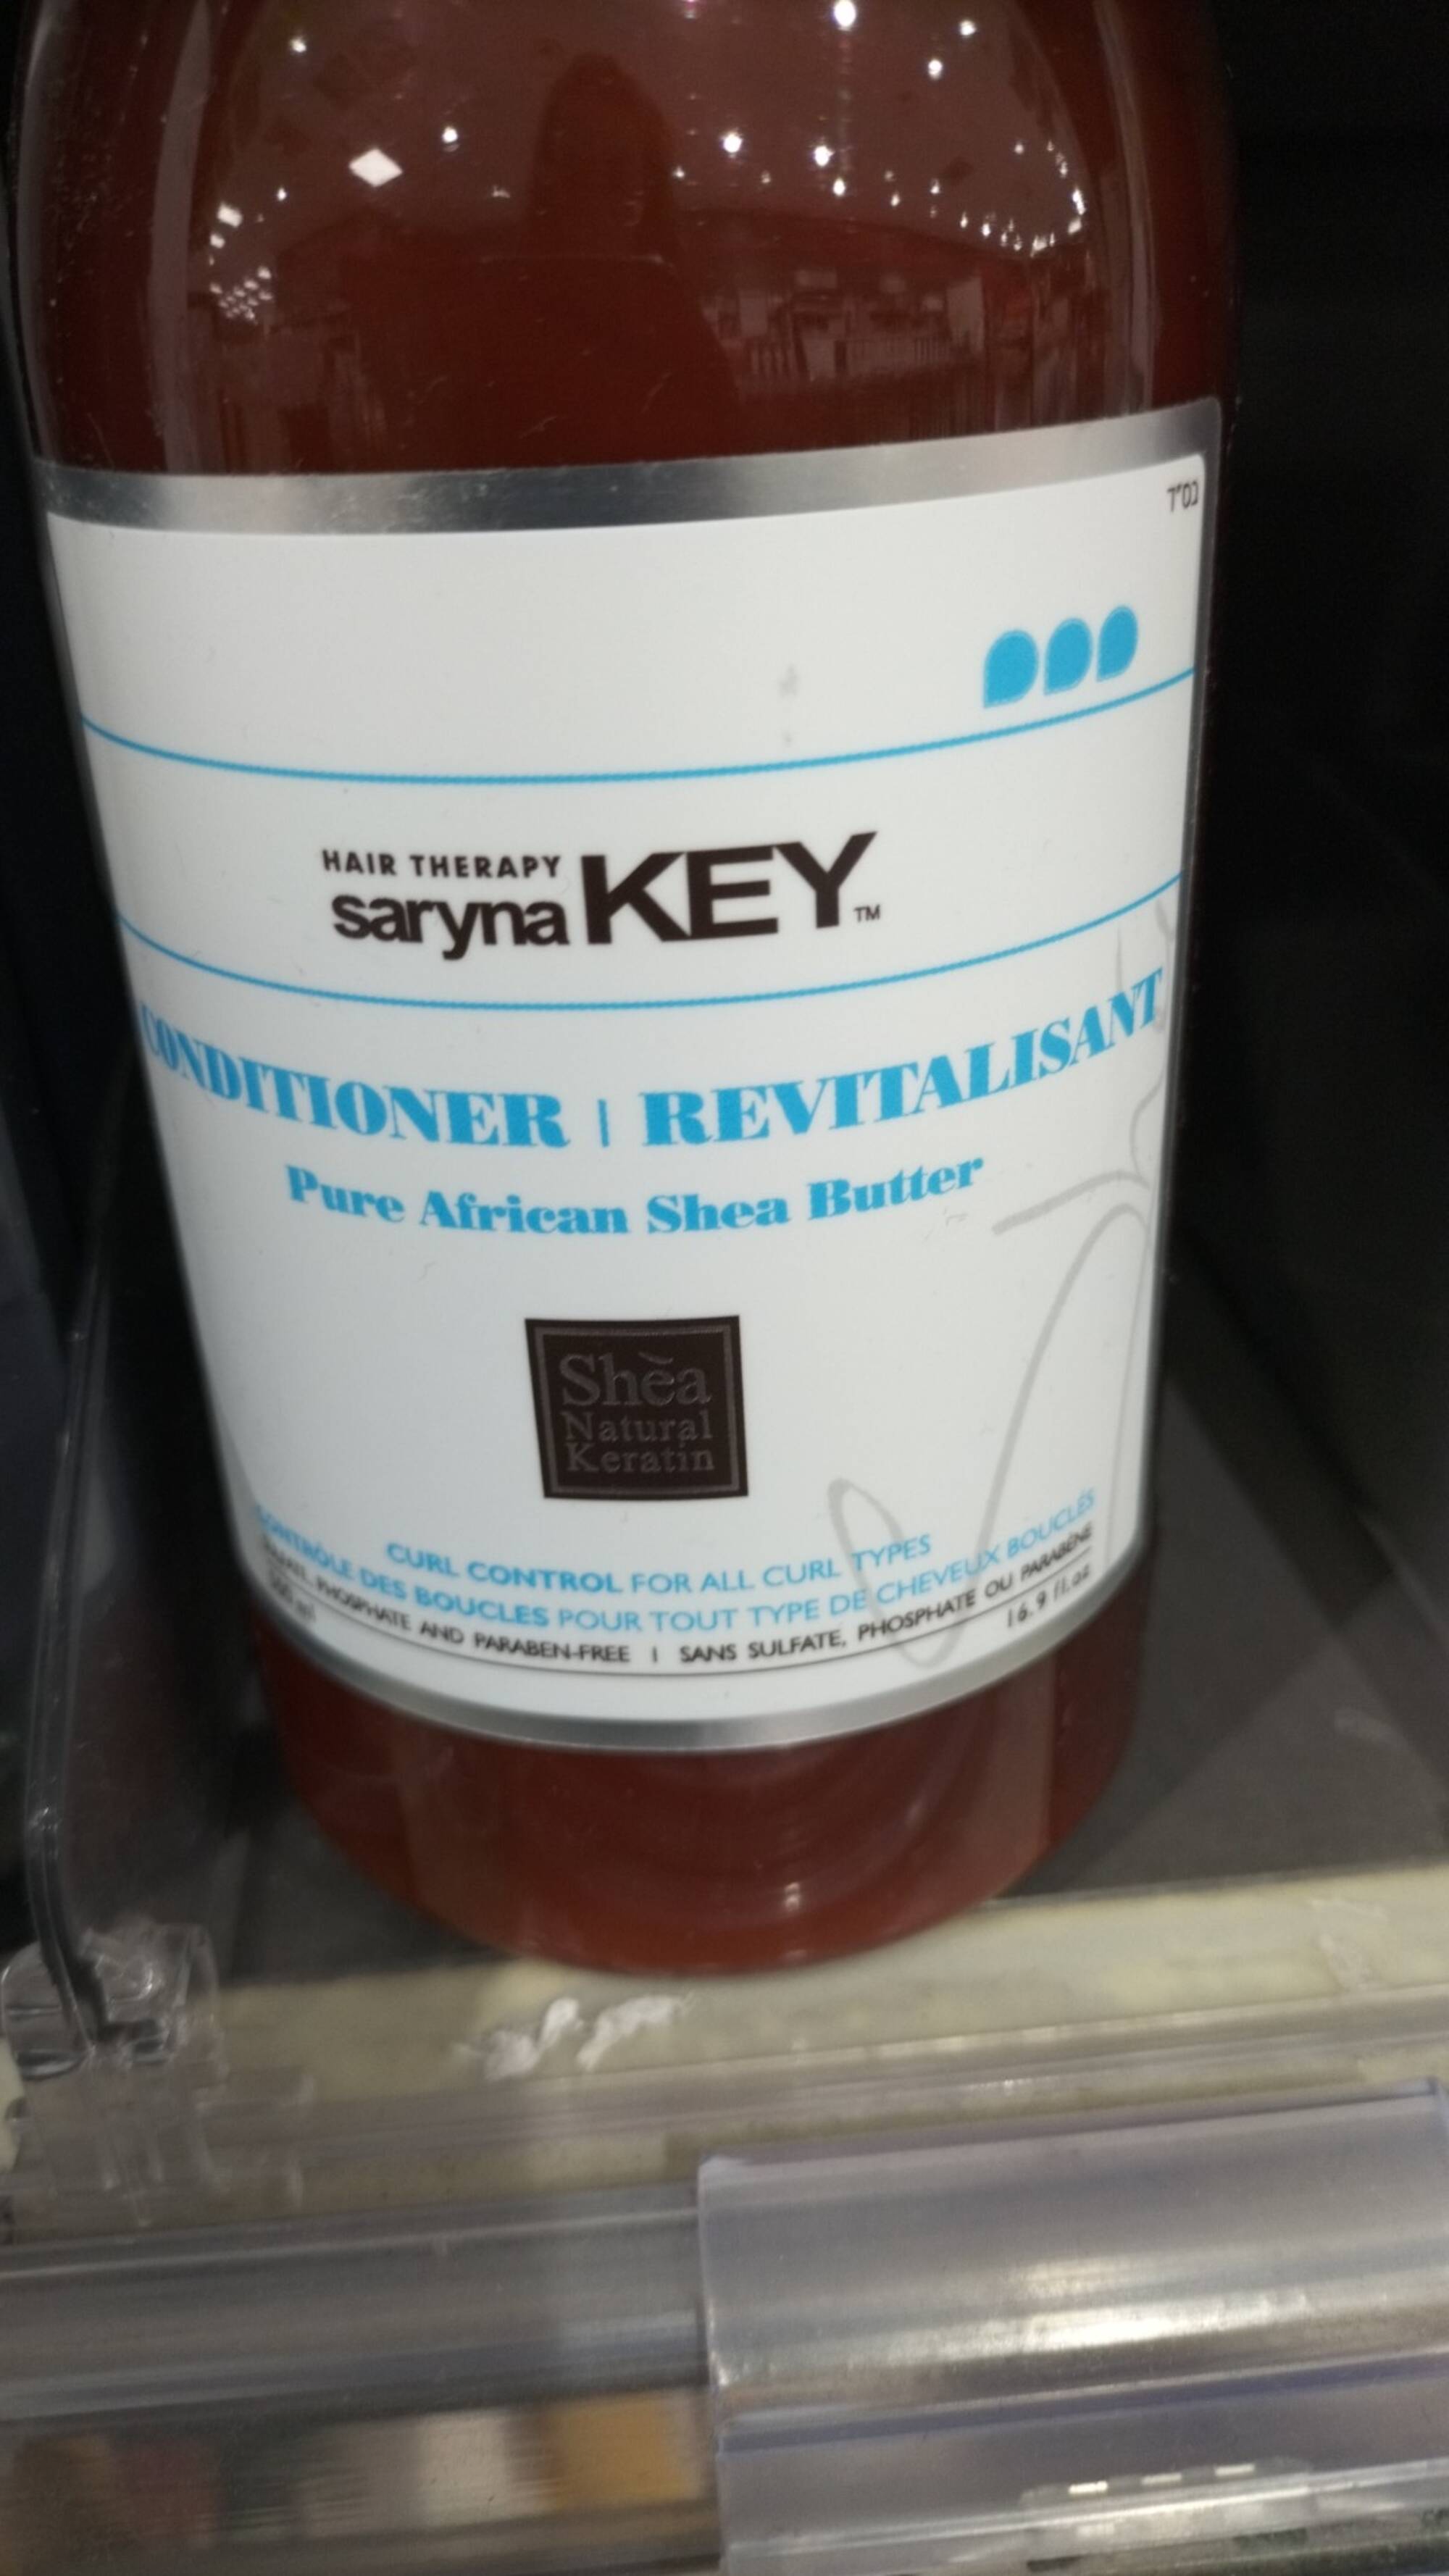 SARYNA KEY - Revitalisant pure african shea butter